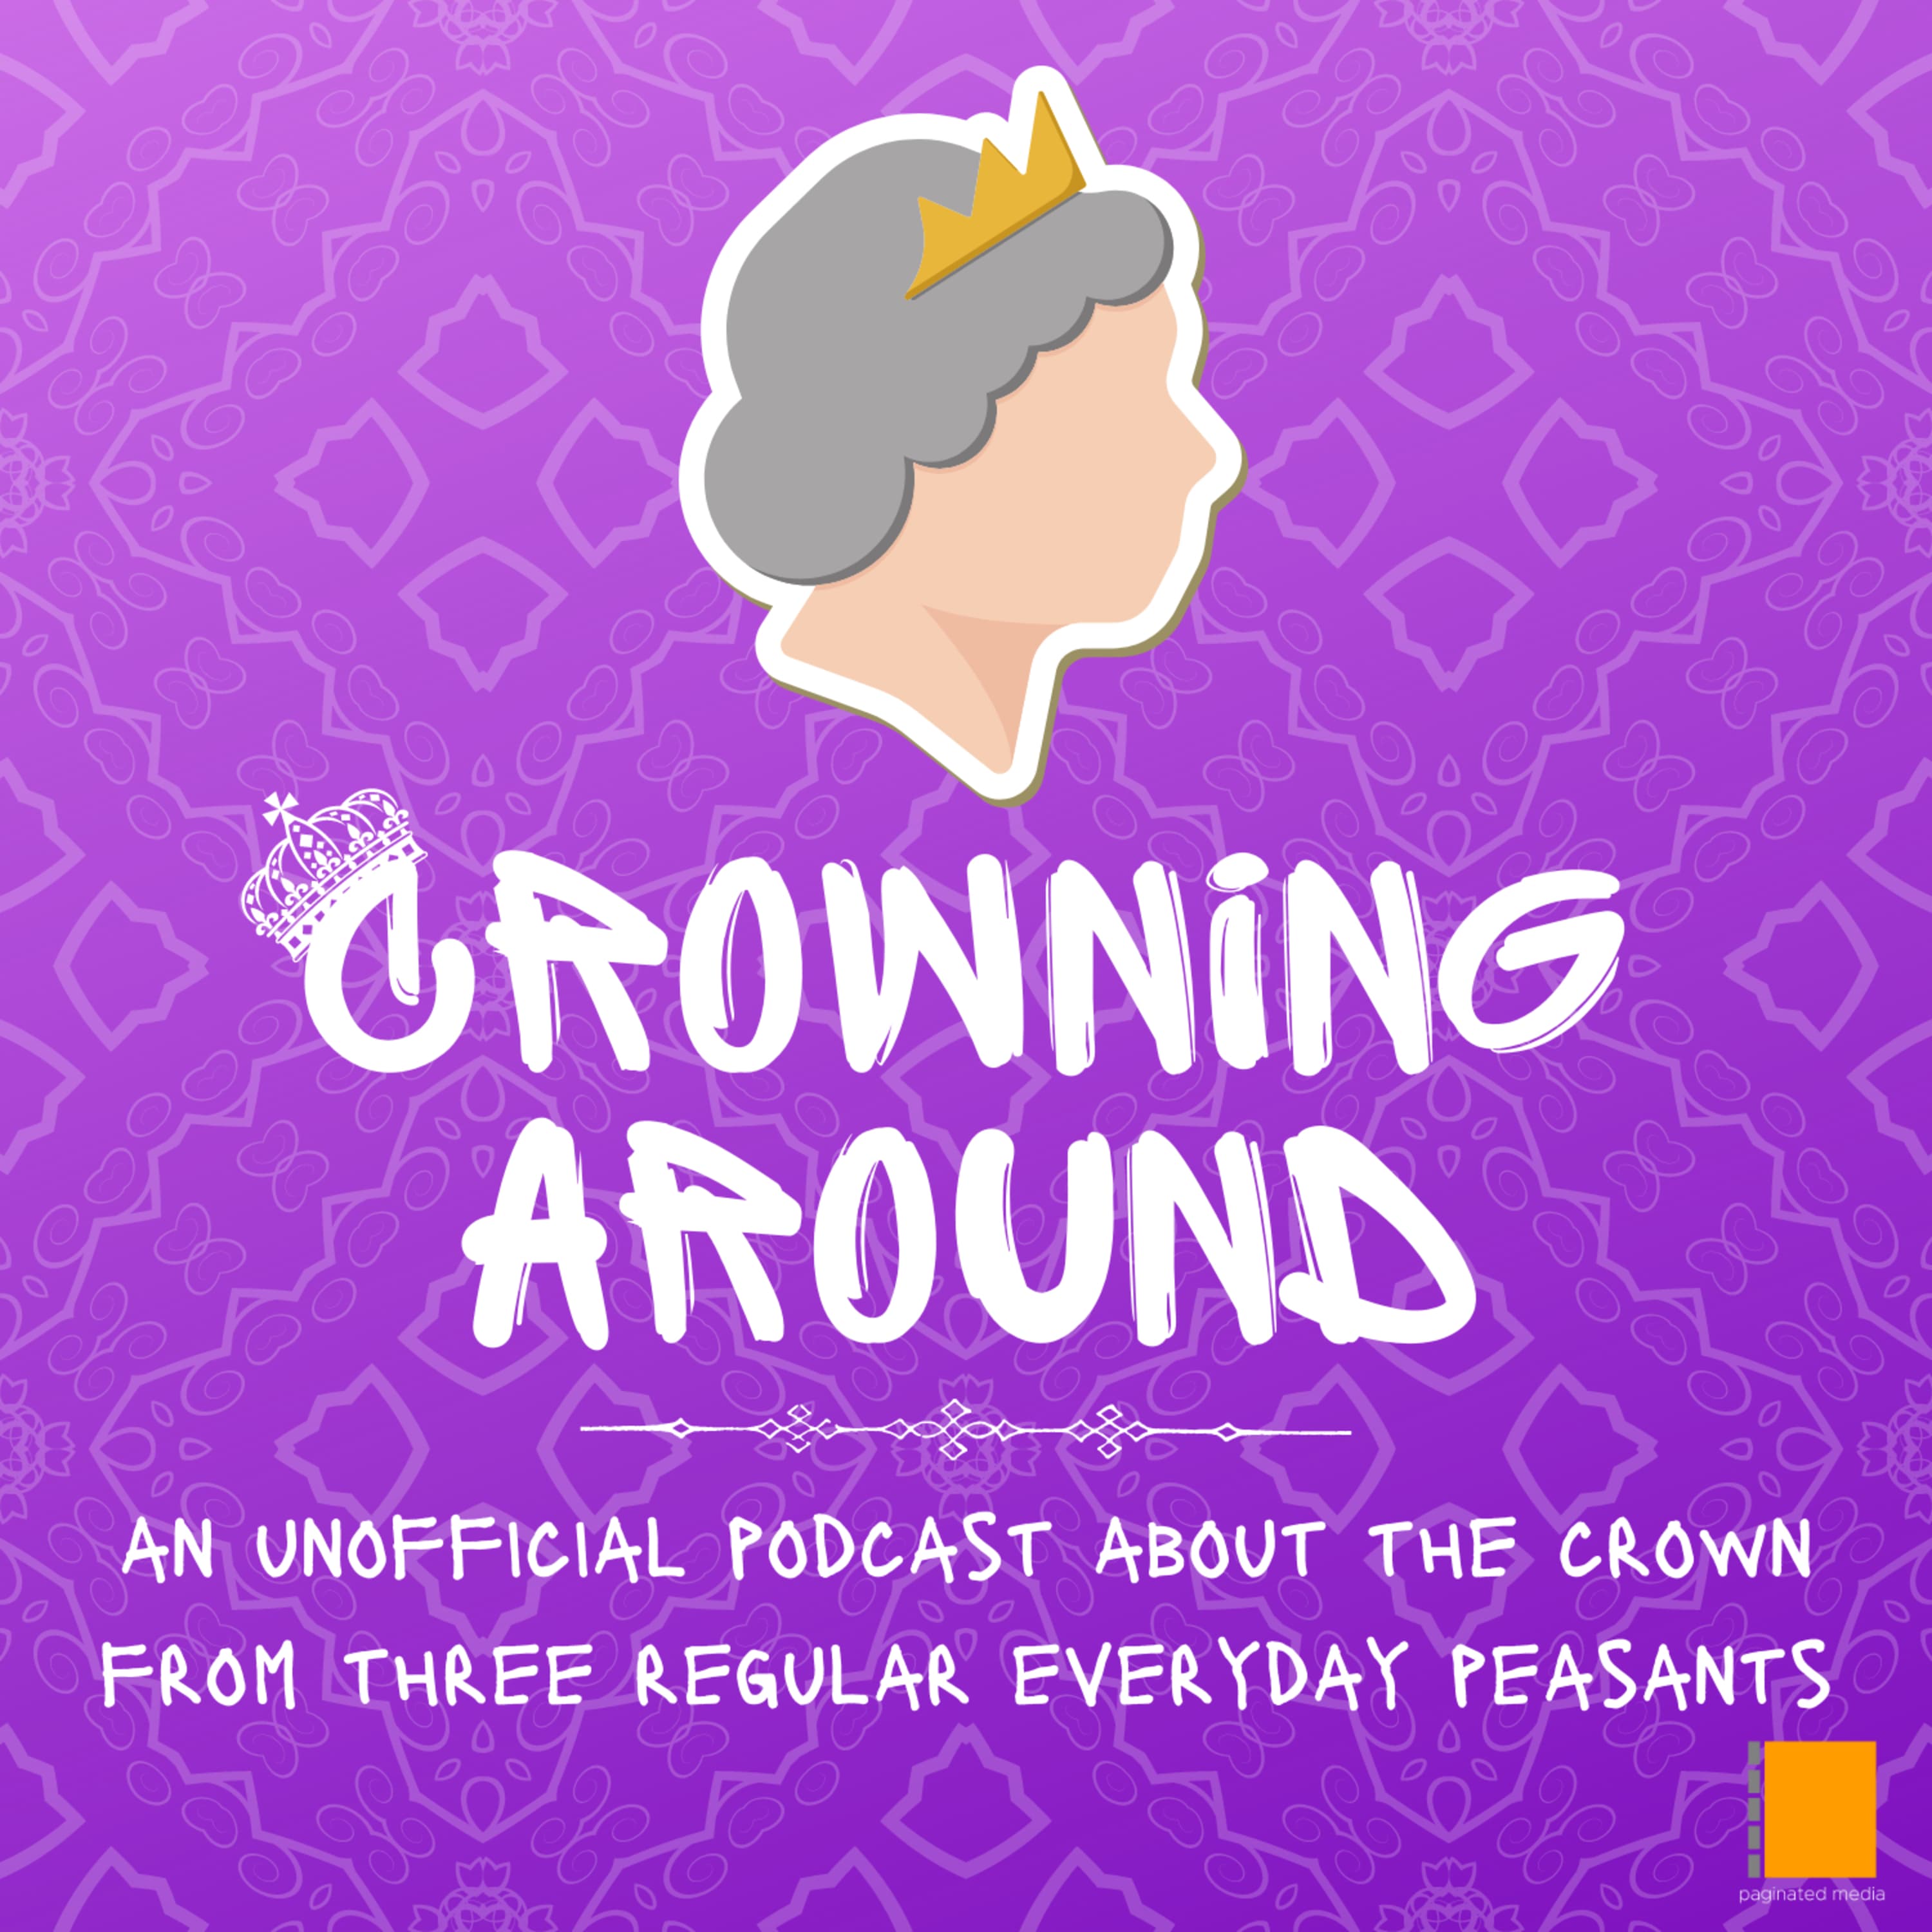 Artwork for podcast Crowning Around